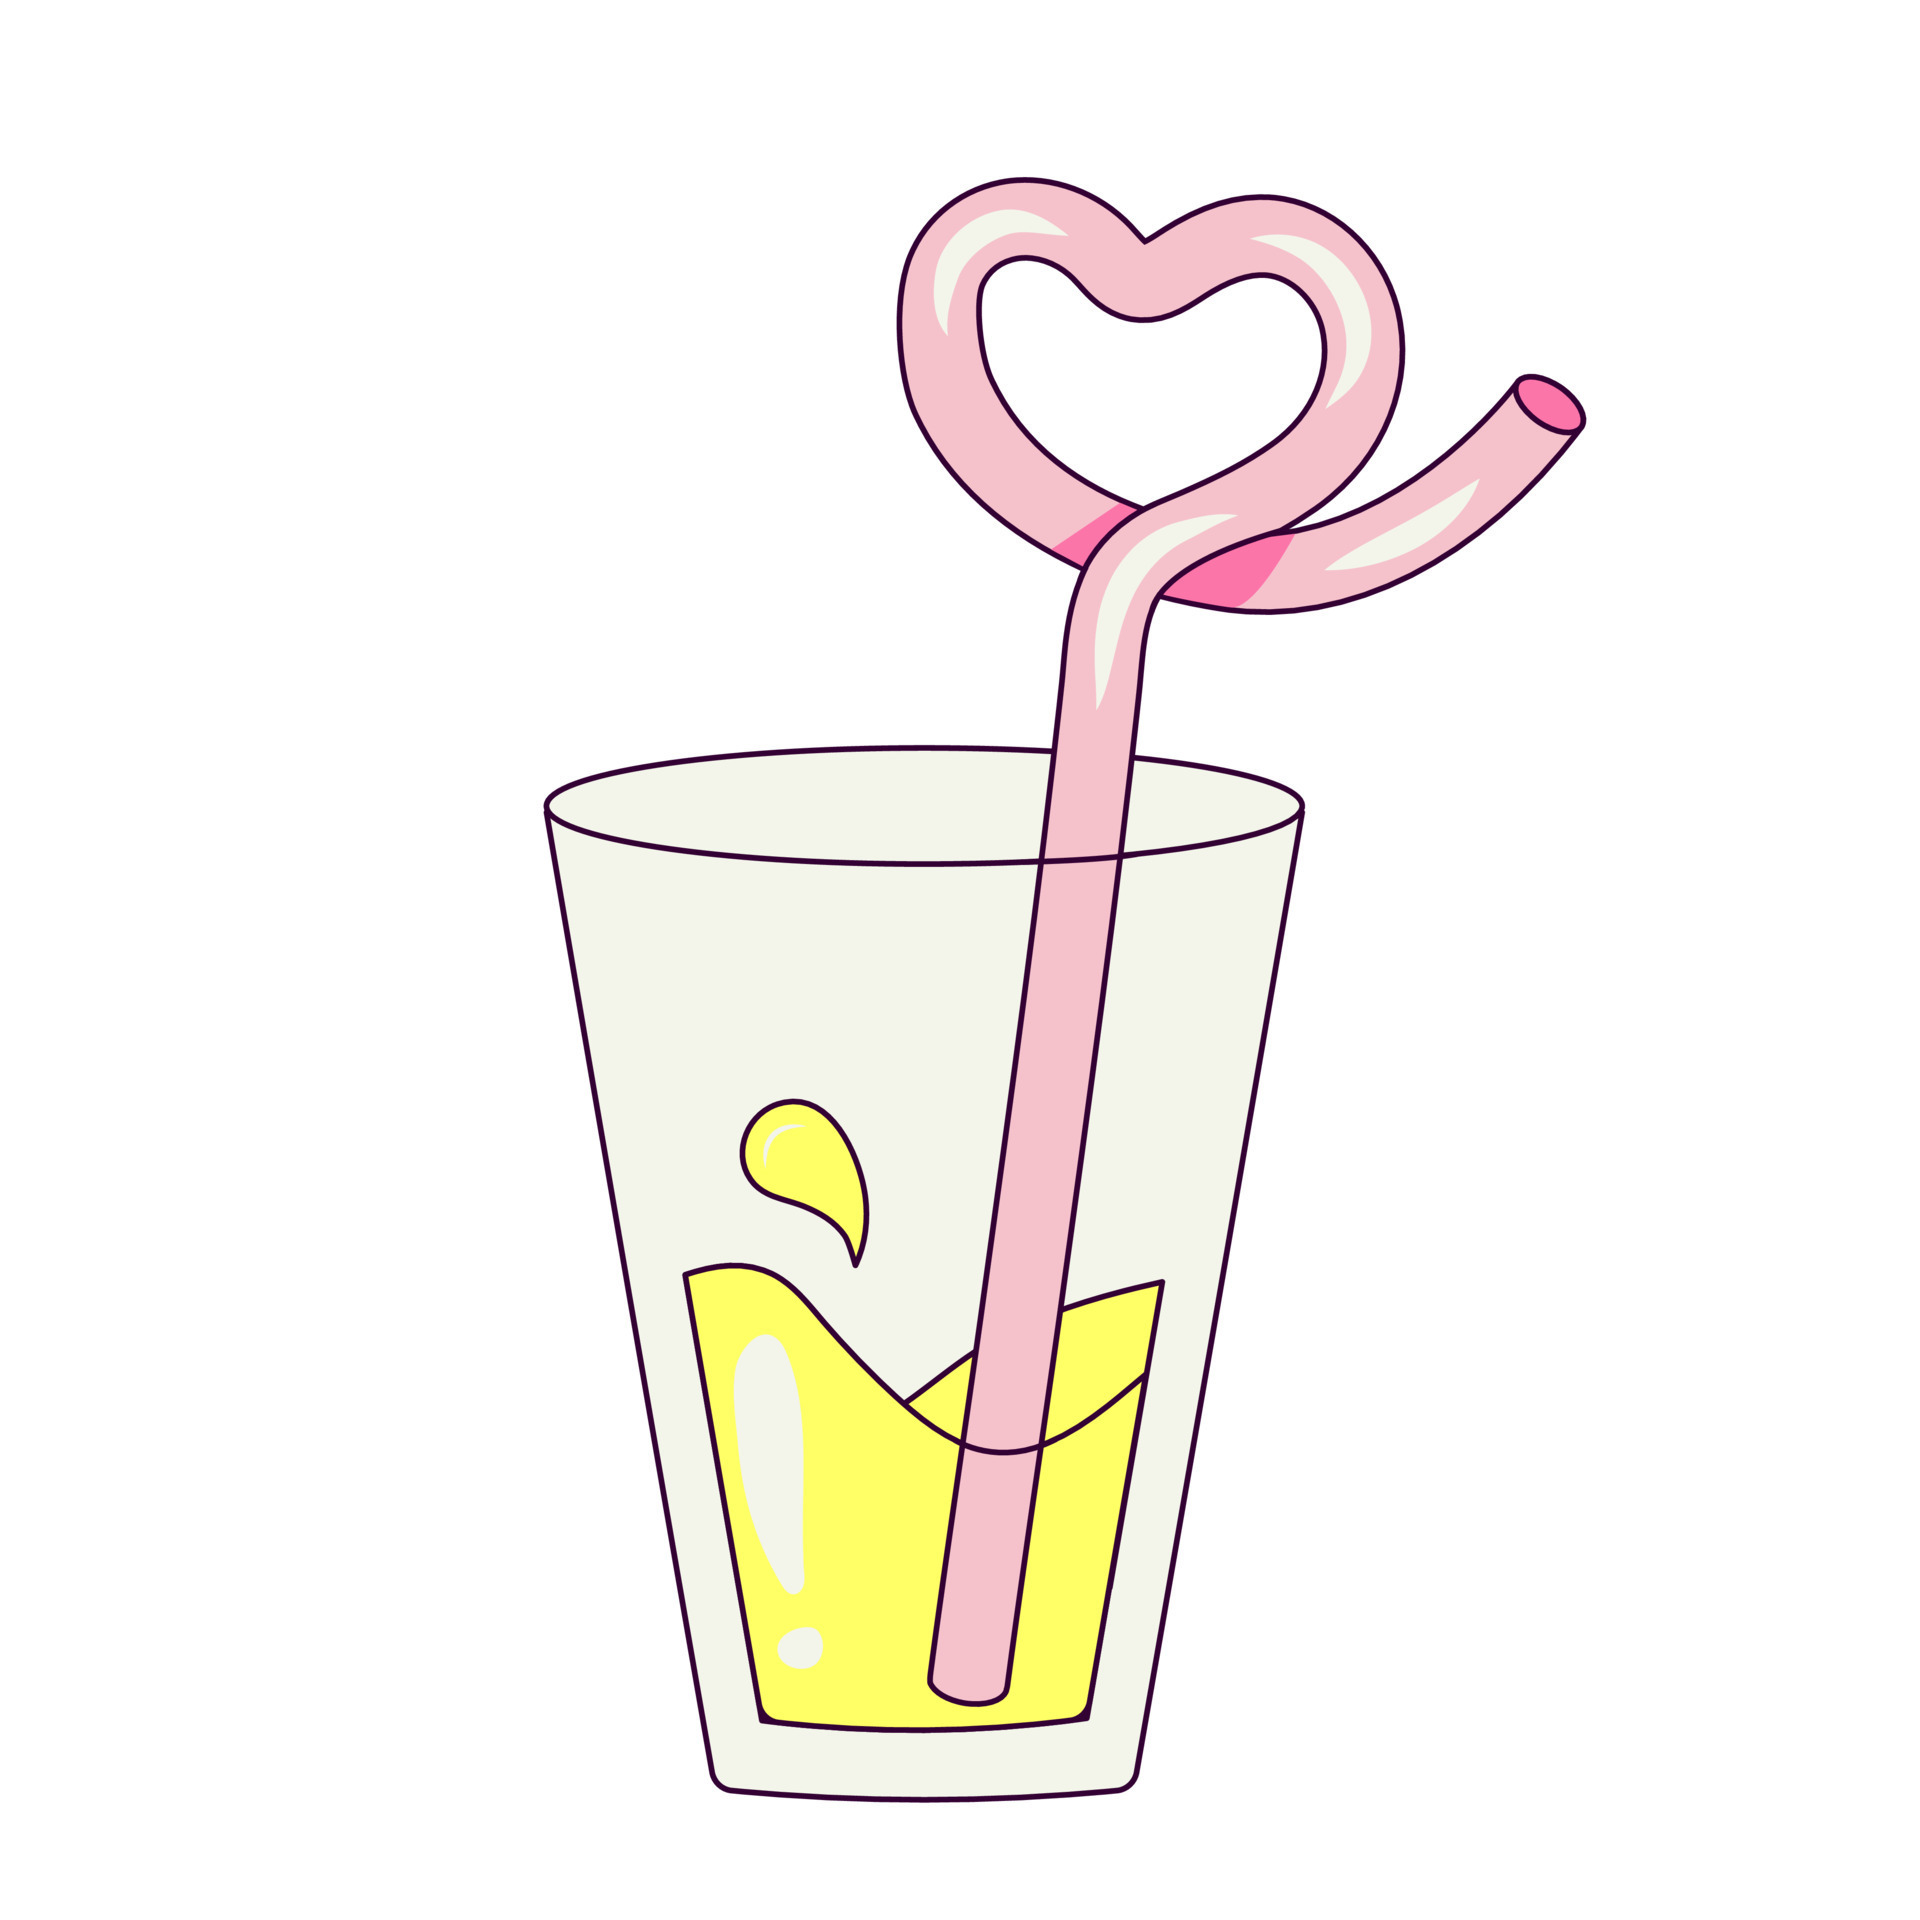 https://static.vecteezy.com/system/resources/previews/012/681/030/original/cocktail-with-a-straw-in-the-shape-of-a-heart-party-illustration-in-groovy-style-temporary-sticker-or-badge-vector.jpg